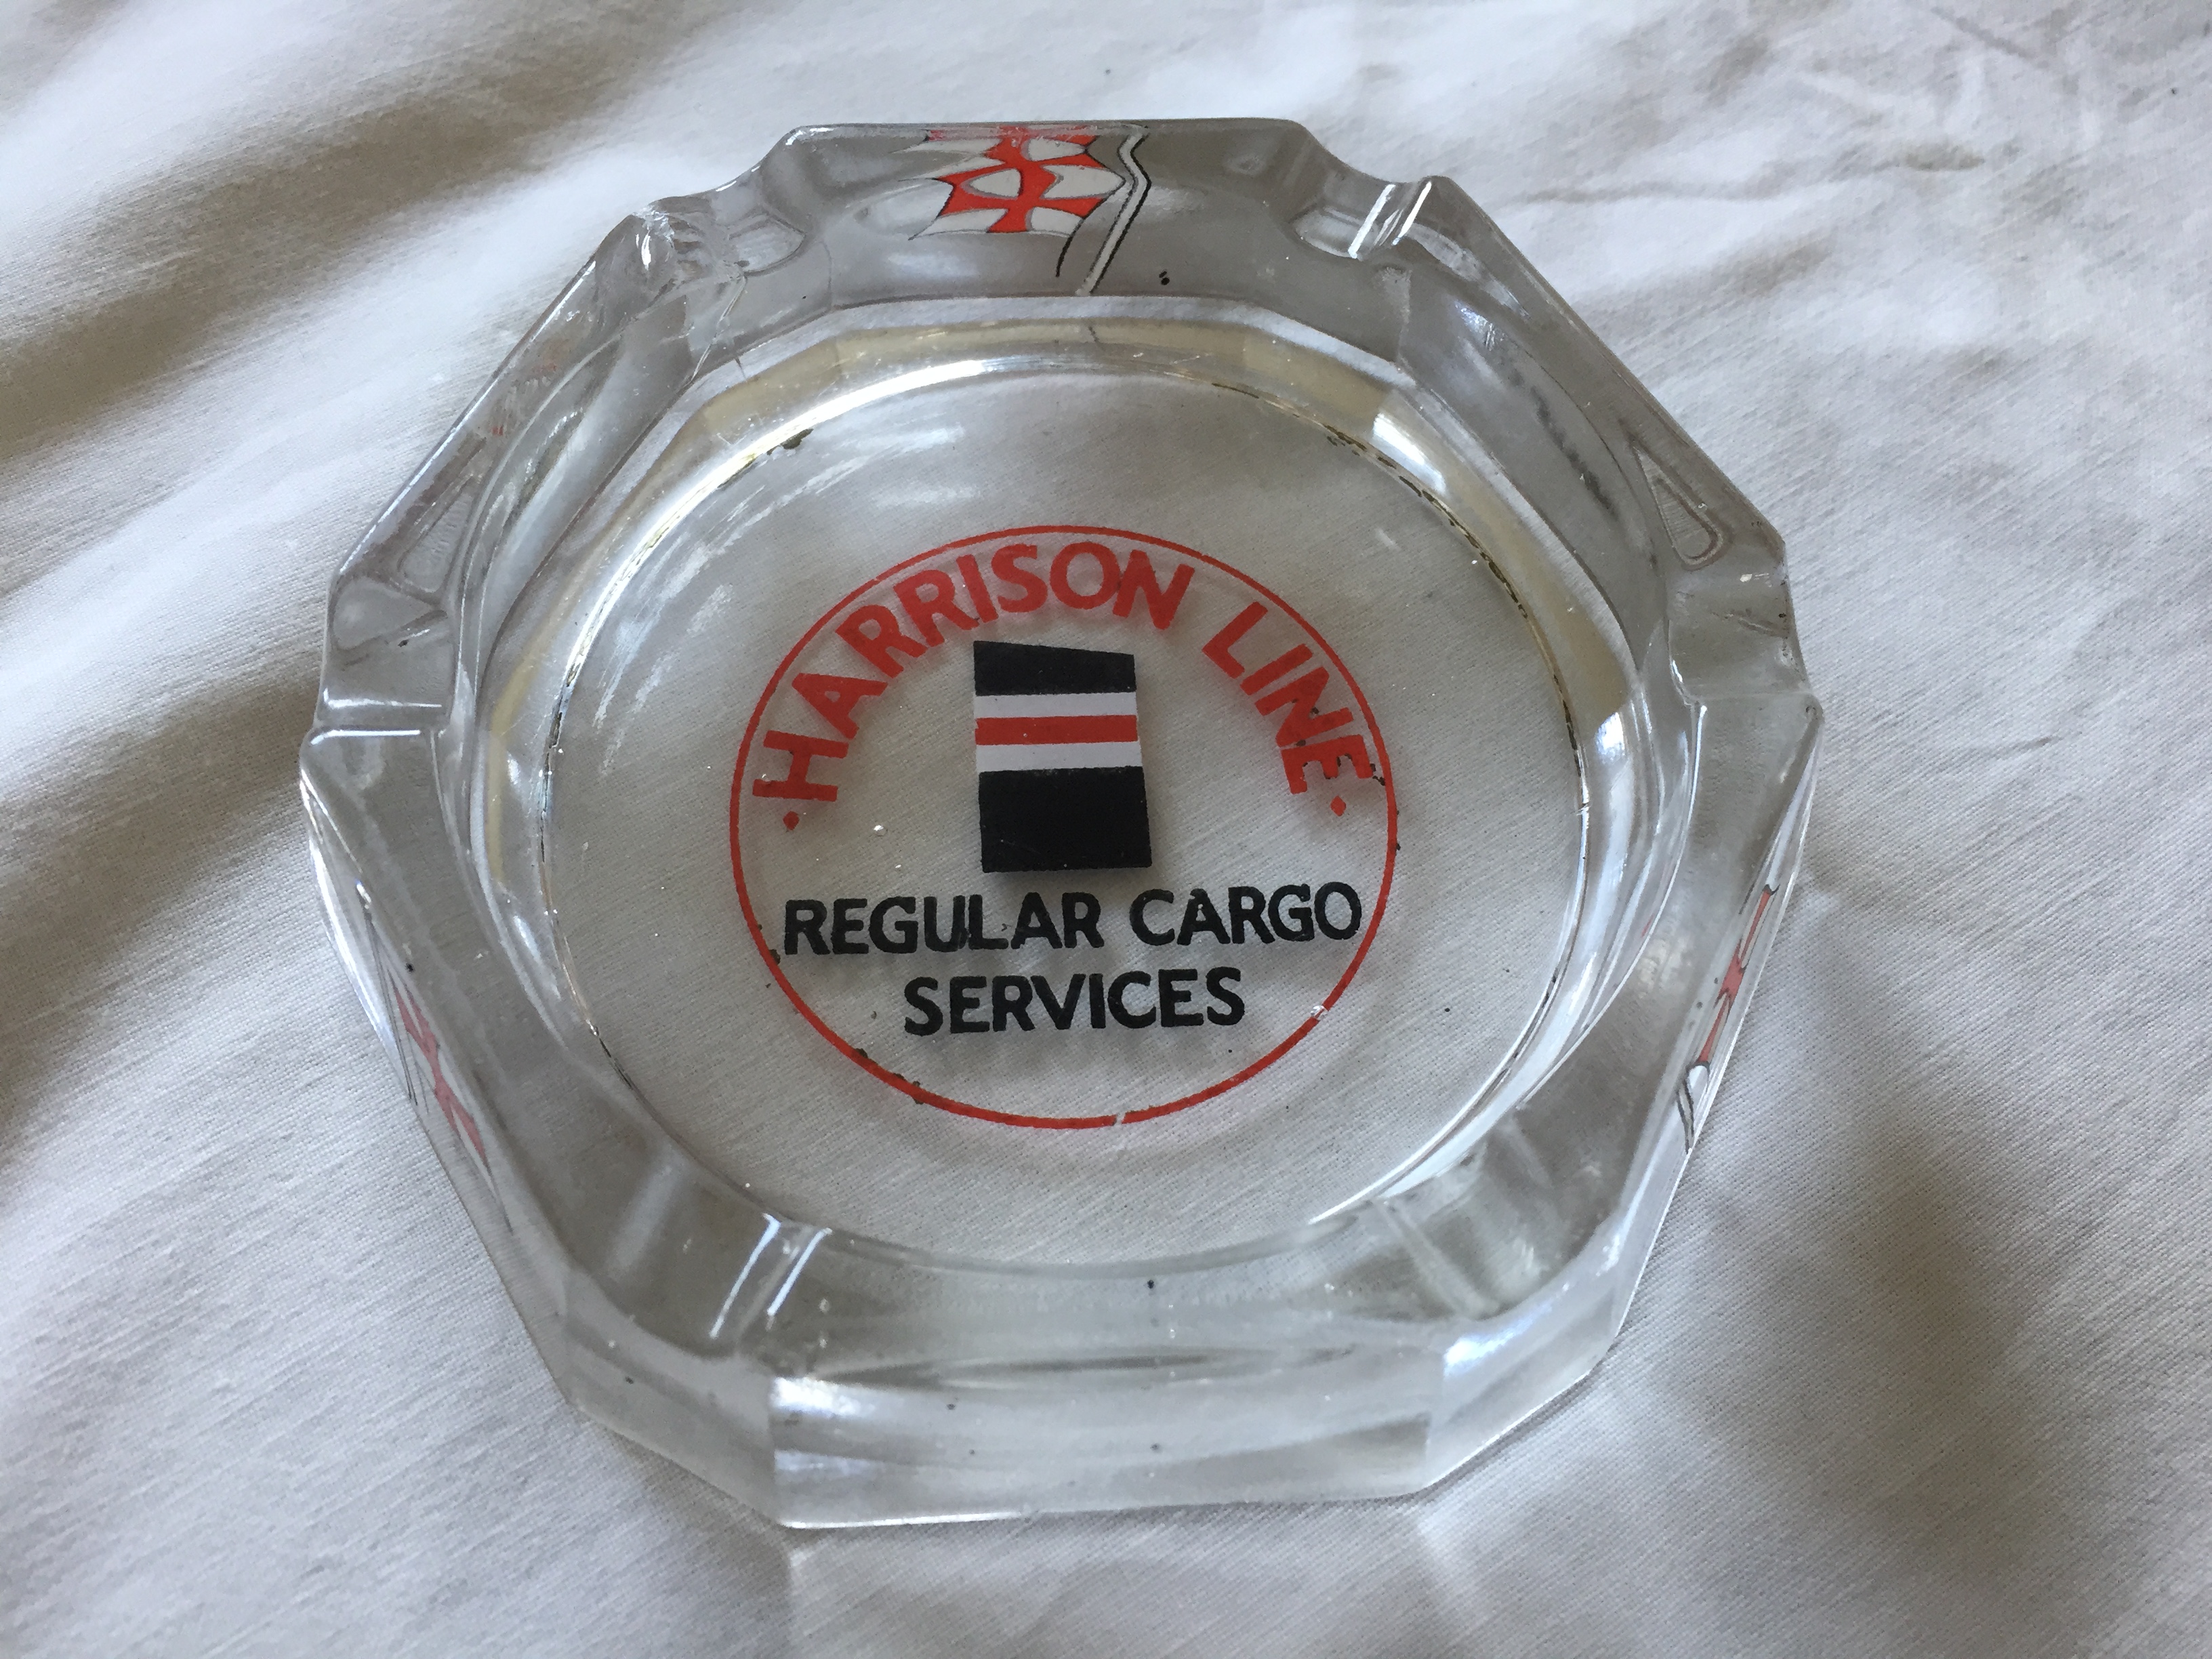 RARE TO FIND ORIGINAL GLASS ASHTRAY FROM THE HARRISON LINE SHIPPING COMPANY